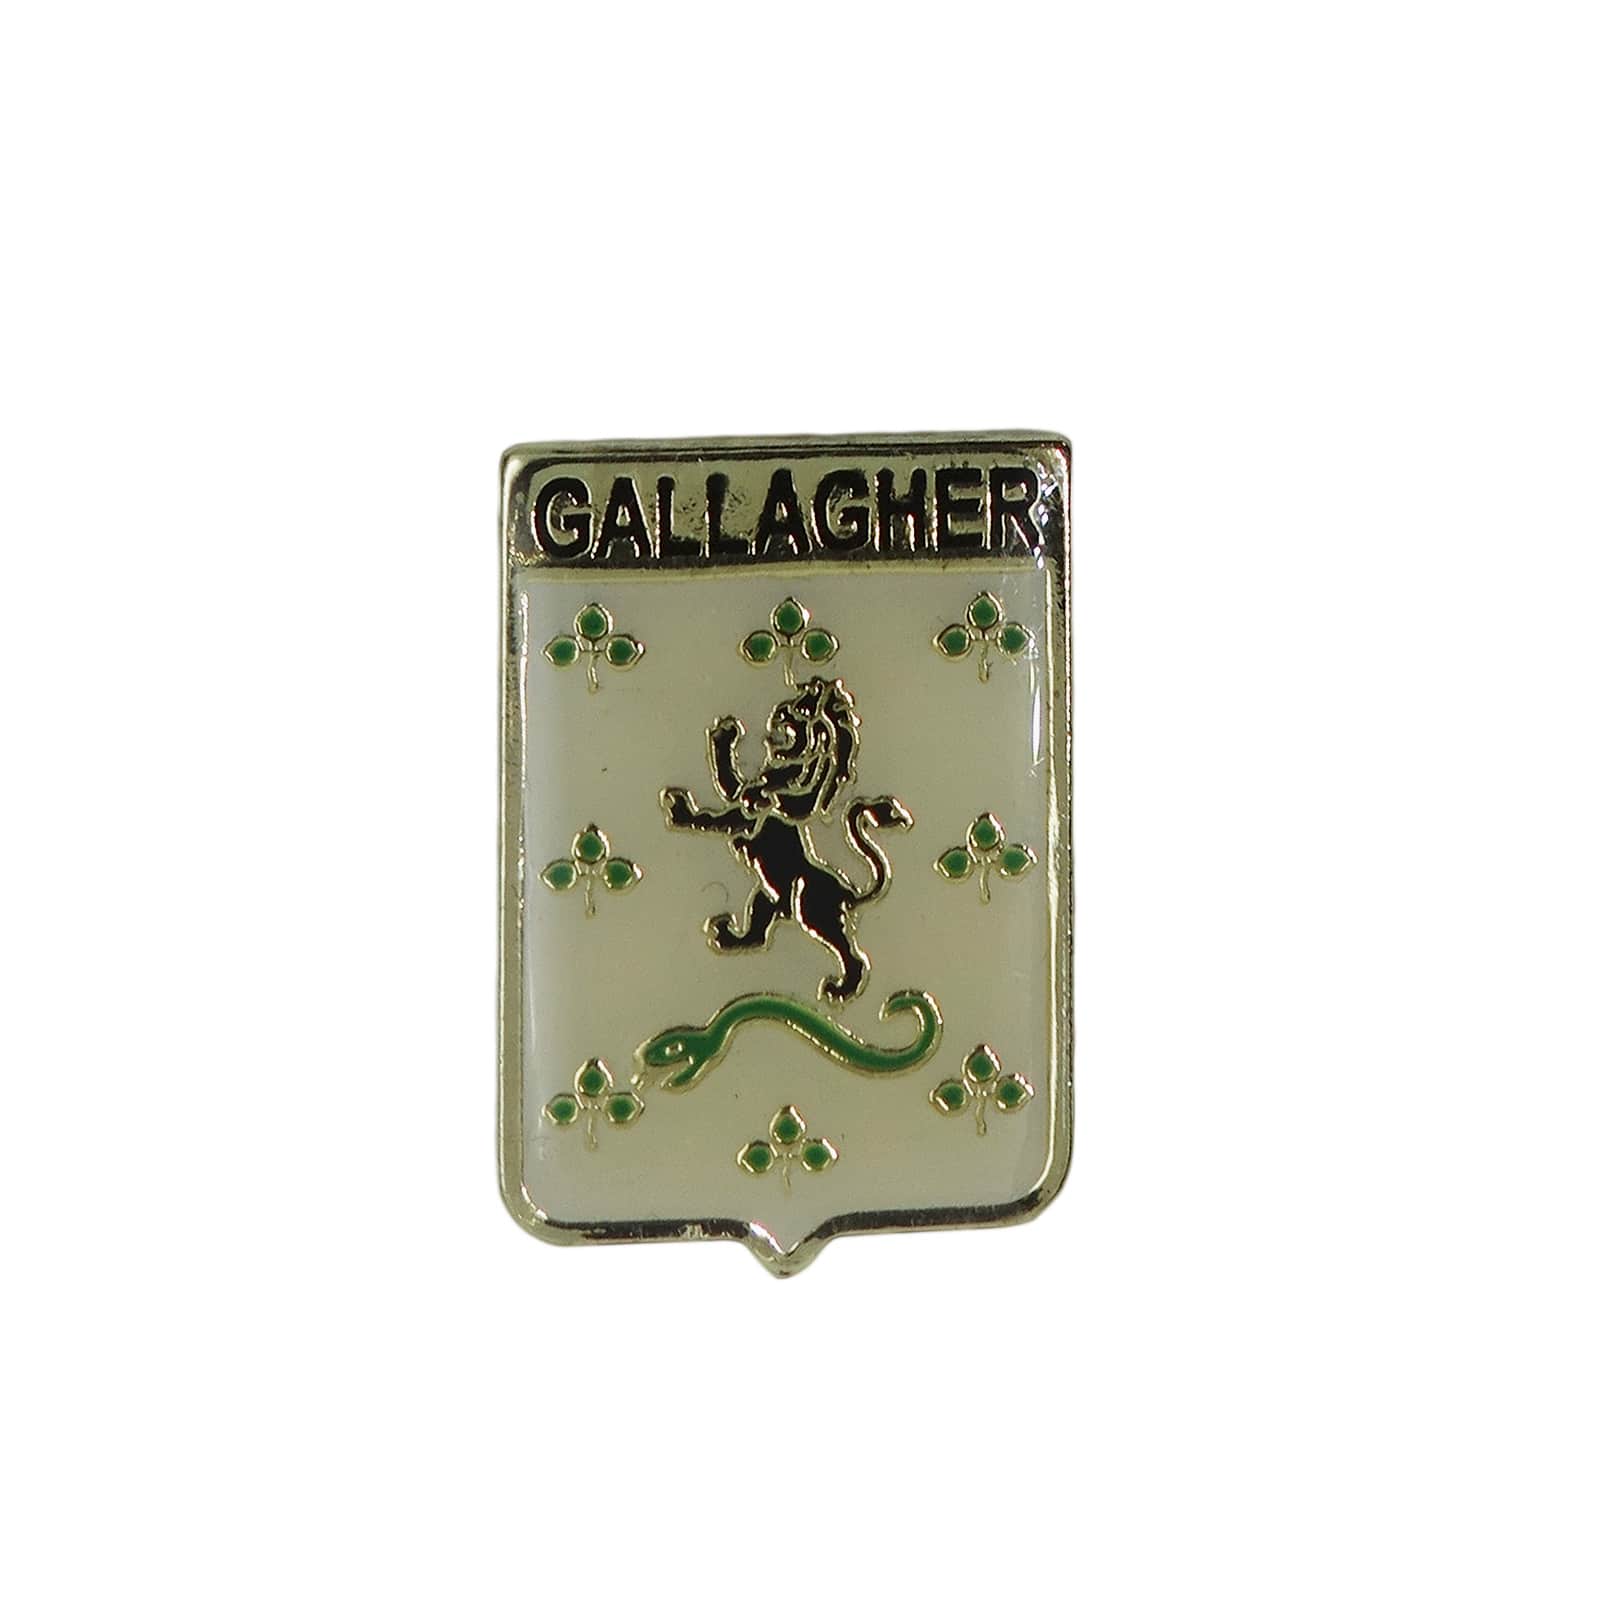 GALLAGHER 紋章 ピンズ 留め具付き